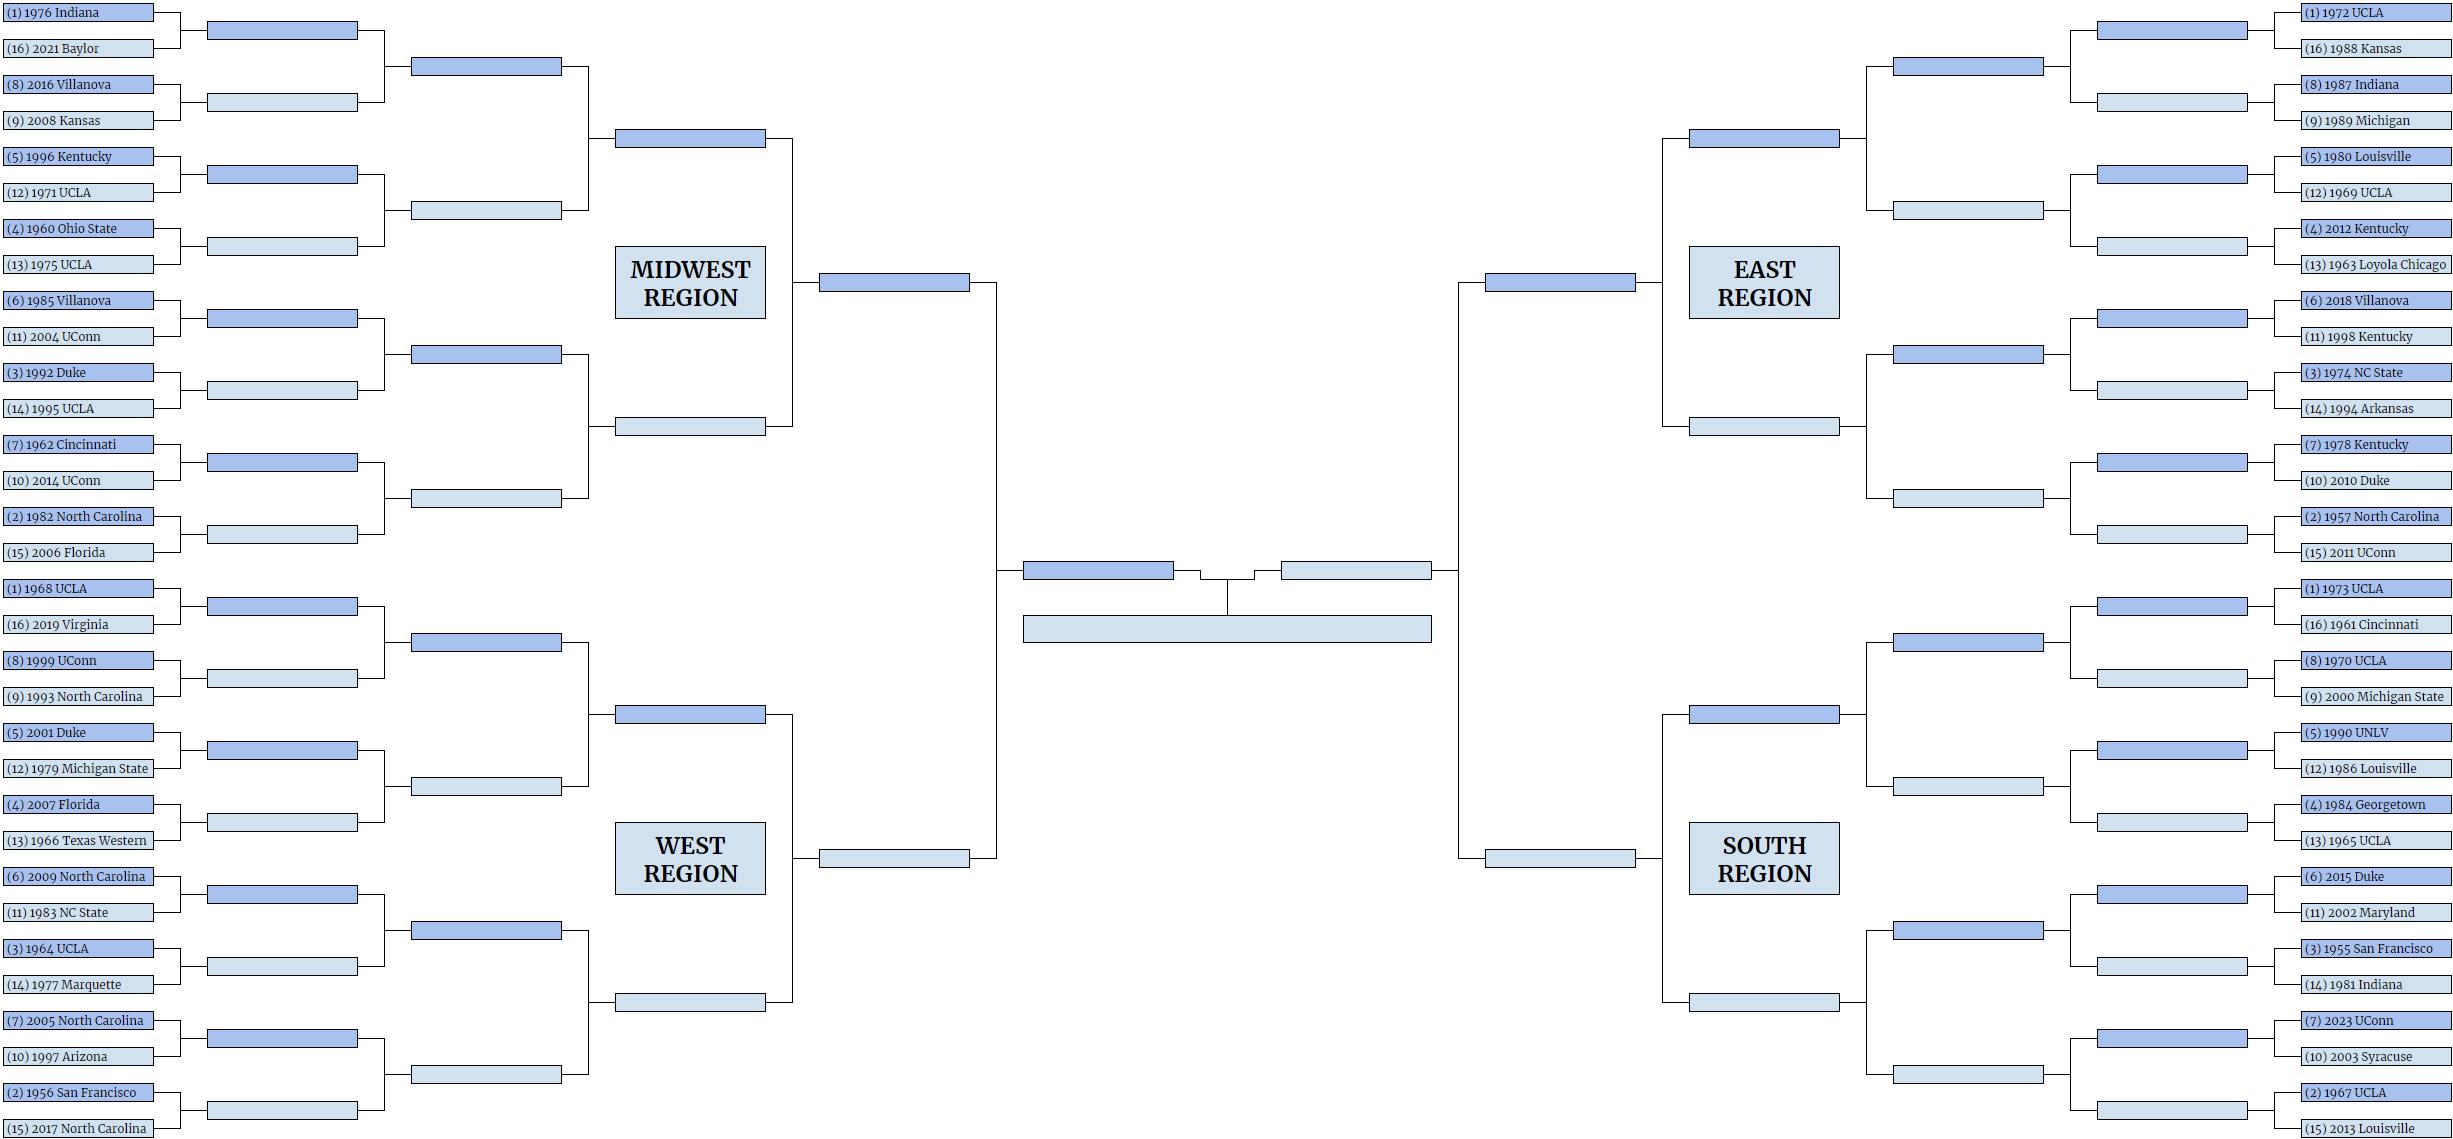 The Tournament of Champions bracket, as seeded by the committee of robot overlords.